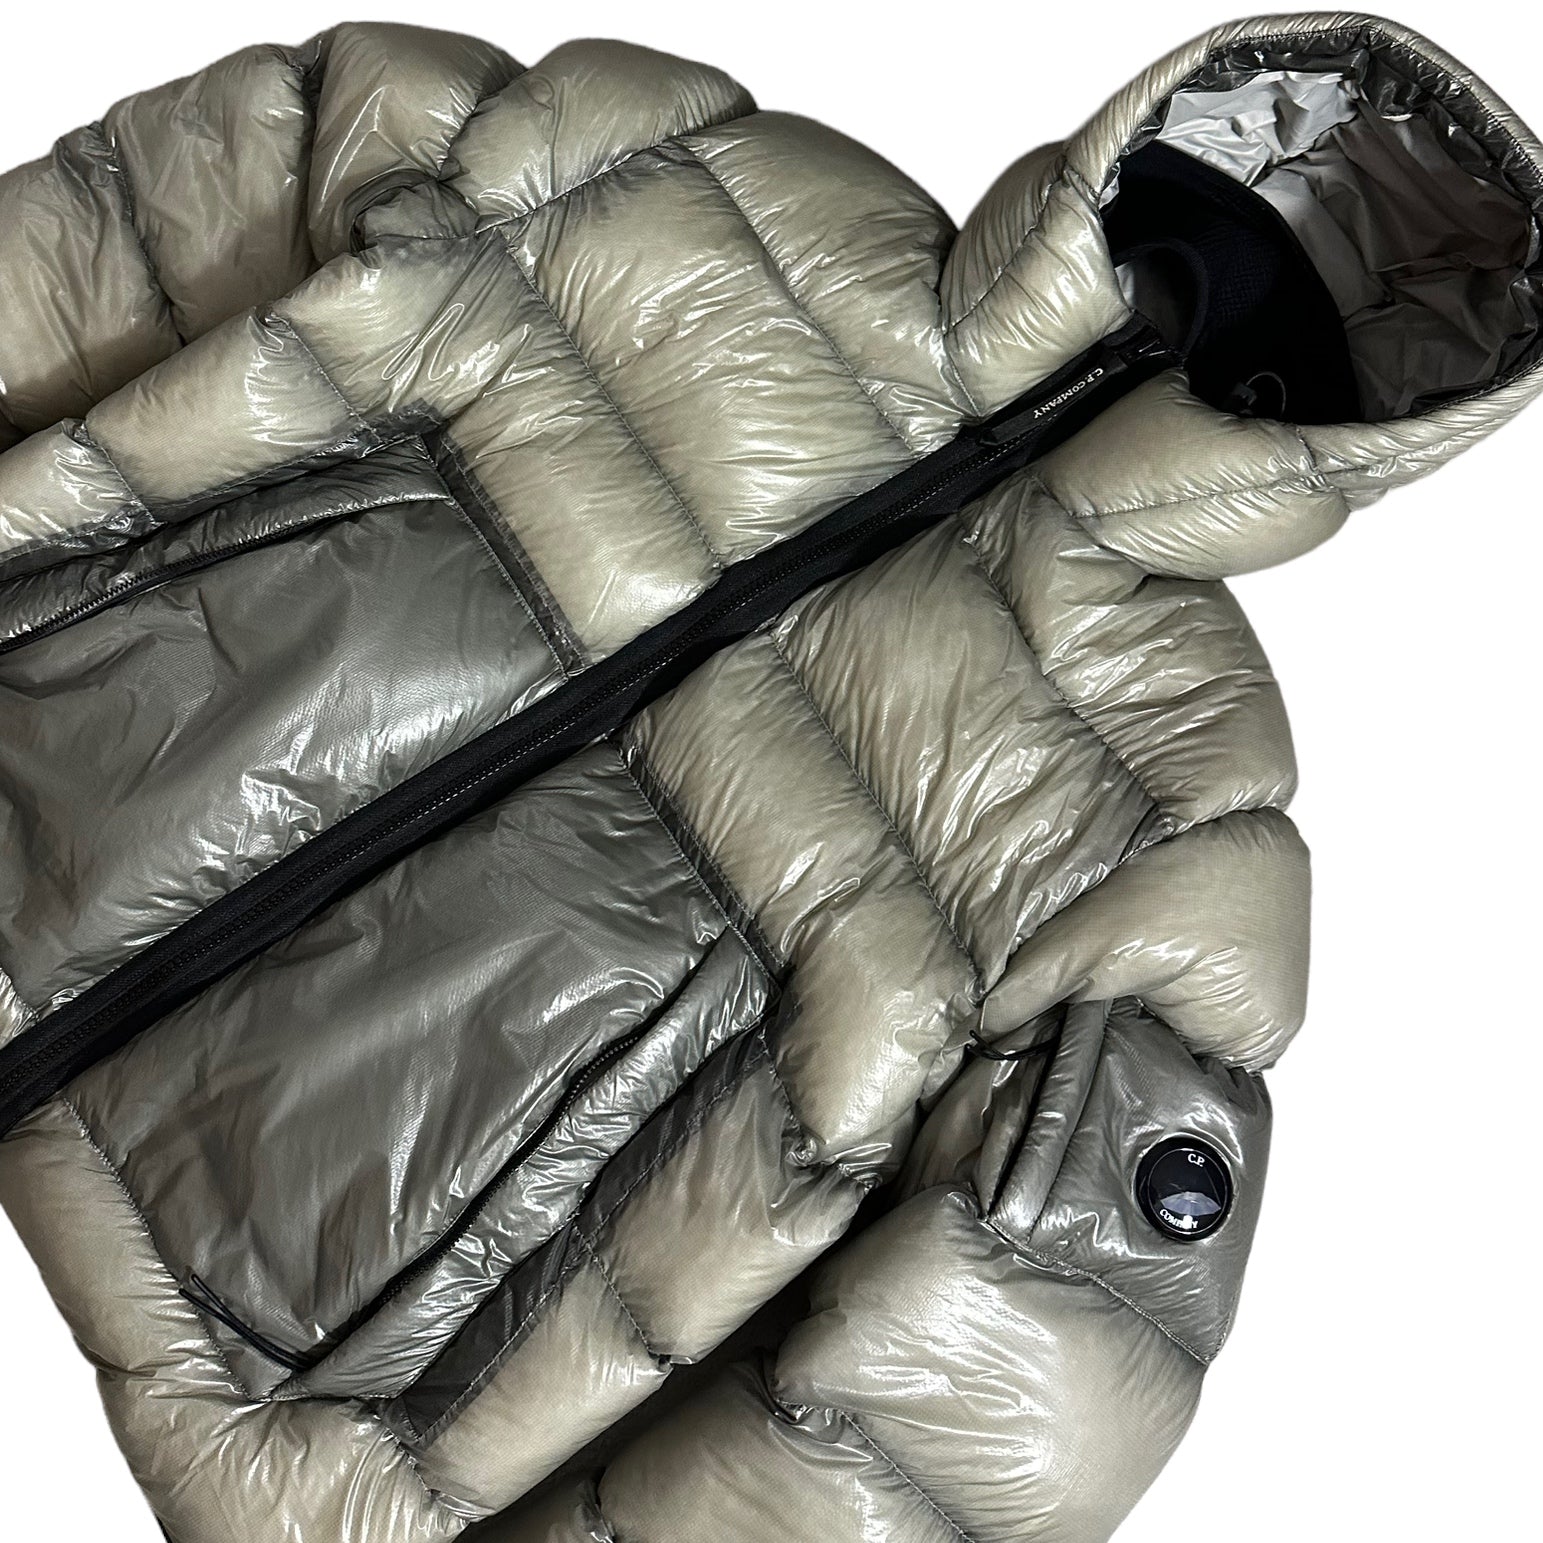 CP Company DD Shell Down Puffer Jacket with Micro Lens